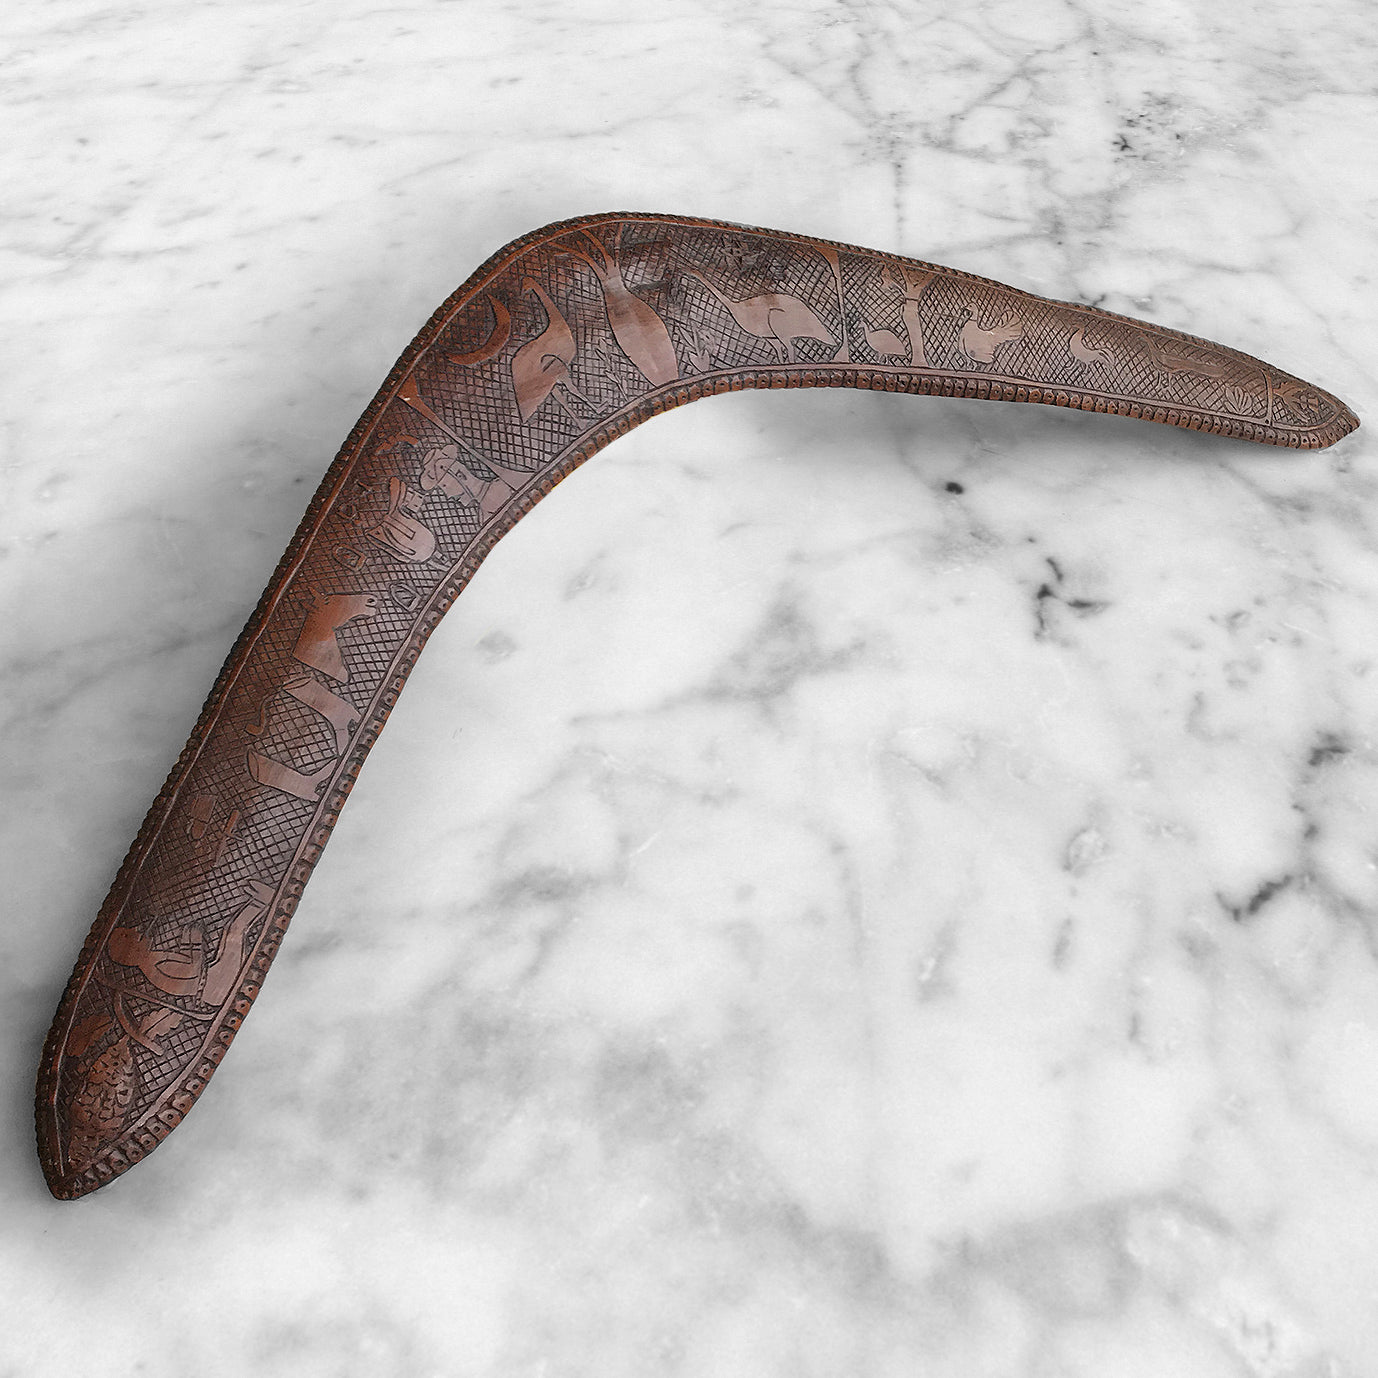 Wonderfully carved Antique Australian Boomerang with amazing naive carving and a beautiful warm colour. On the right side the carved elements include 2 emus, a cockerel, a turkey, a peacock a pea hen and a thistle, whilst on the left side we have a chap smoking a pipe, a knife, a cap, riding boots, pipe, horse, saddle, stirrups, hand cuffs, revolver, and Australian in an army hat. The background has a crosshatch design whilst the edge is finished in a carved dotted pattern - SHOP NOW - www.intovintage.co.uk